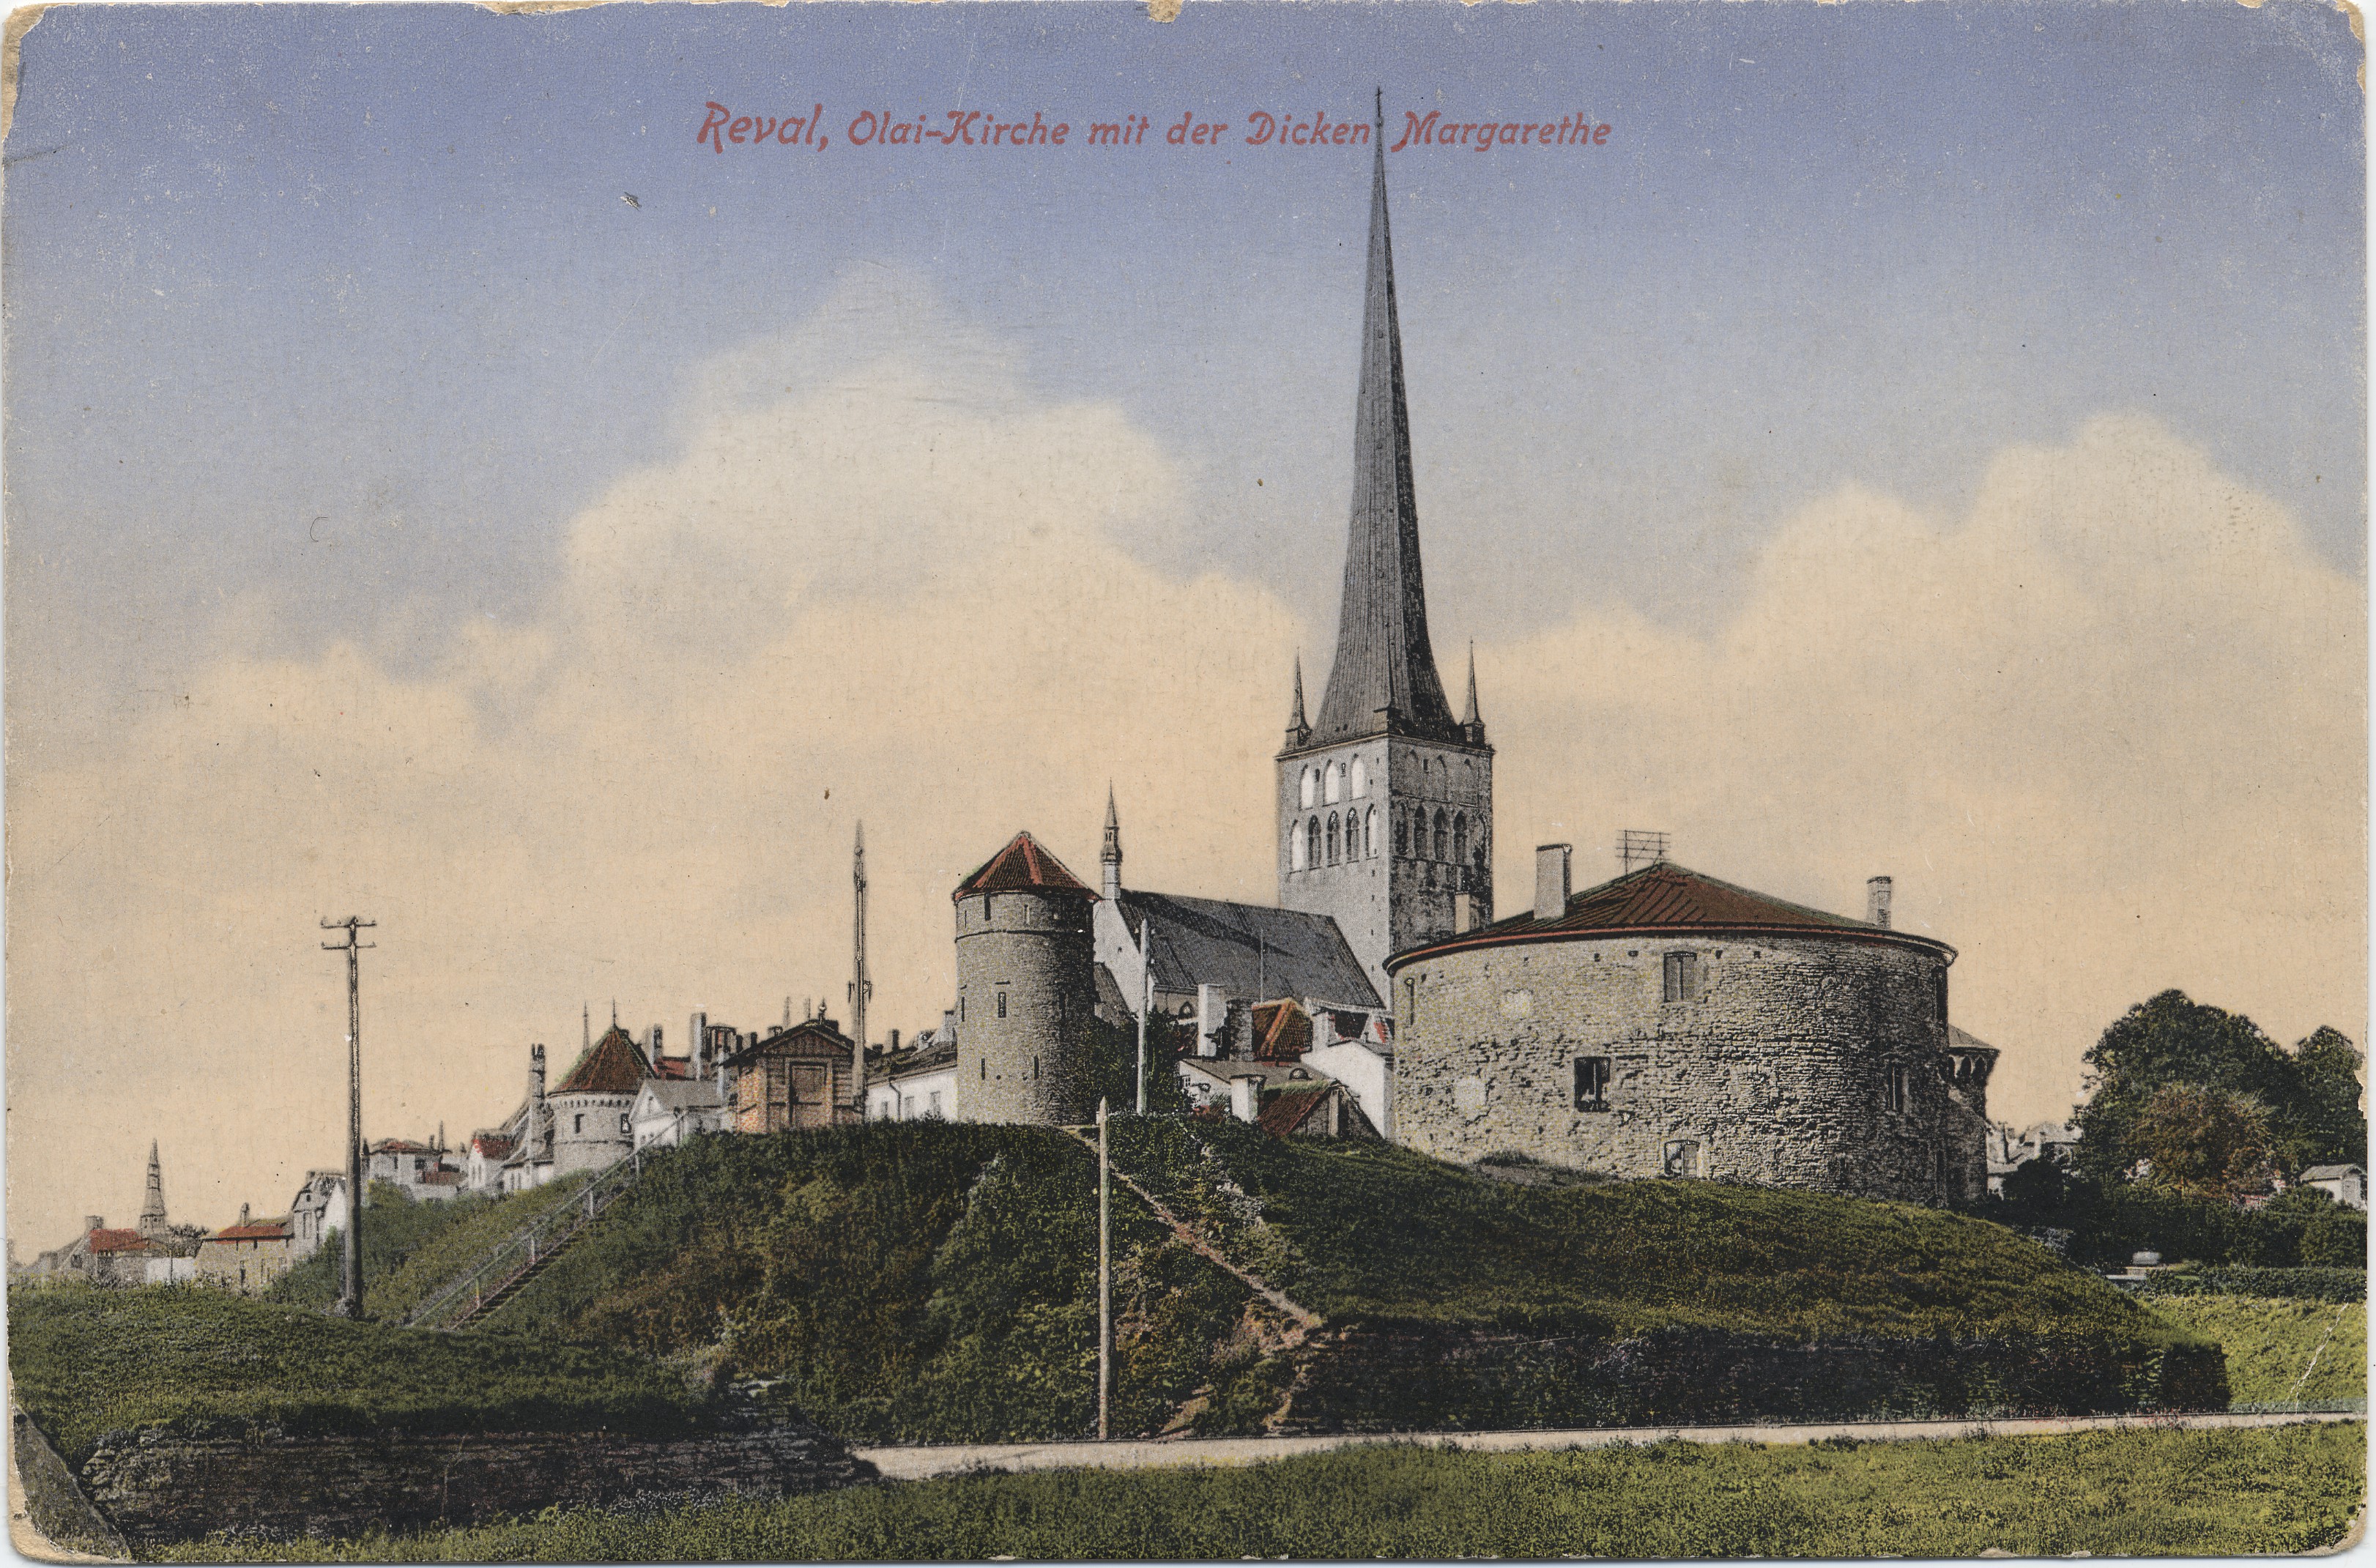 Reval : Olai Church with the Dicken Margarethe